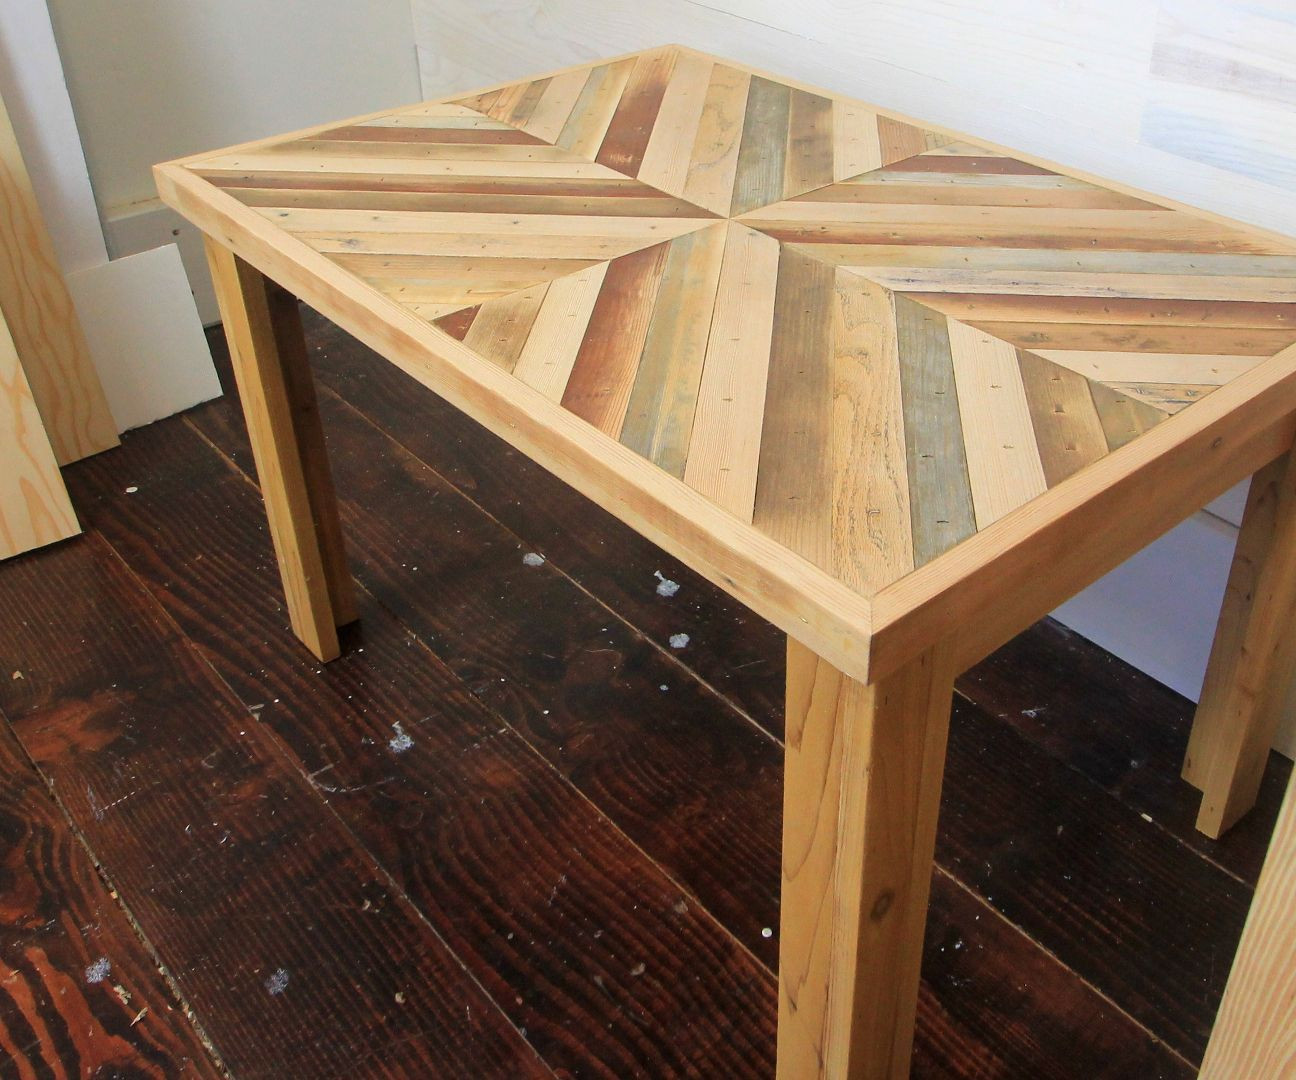 Reclaimed Wood Table DIY
 DIY Rustic Style Coffee Table with Reclaimed Wood